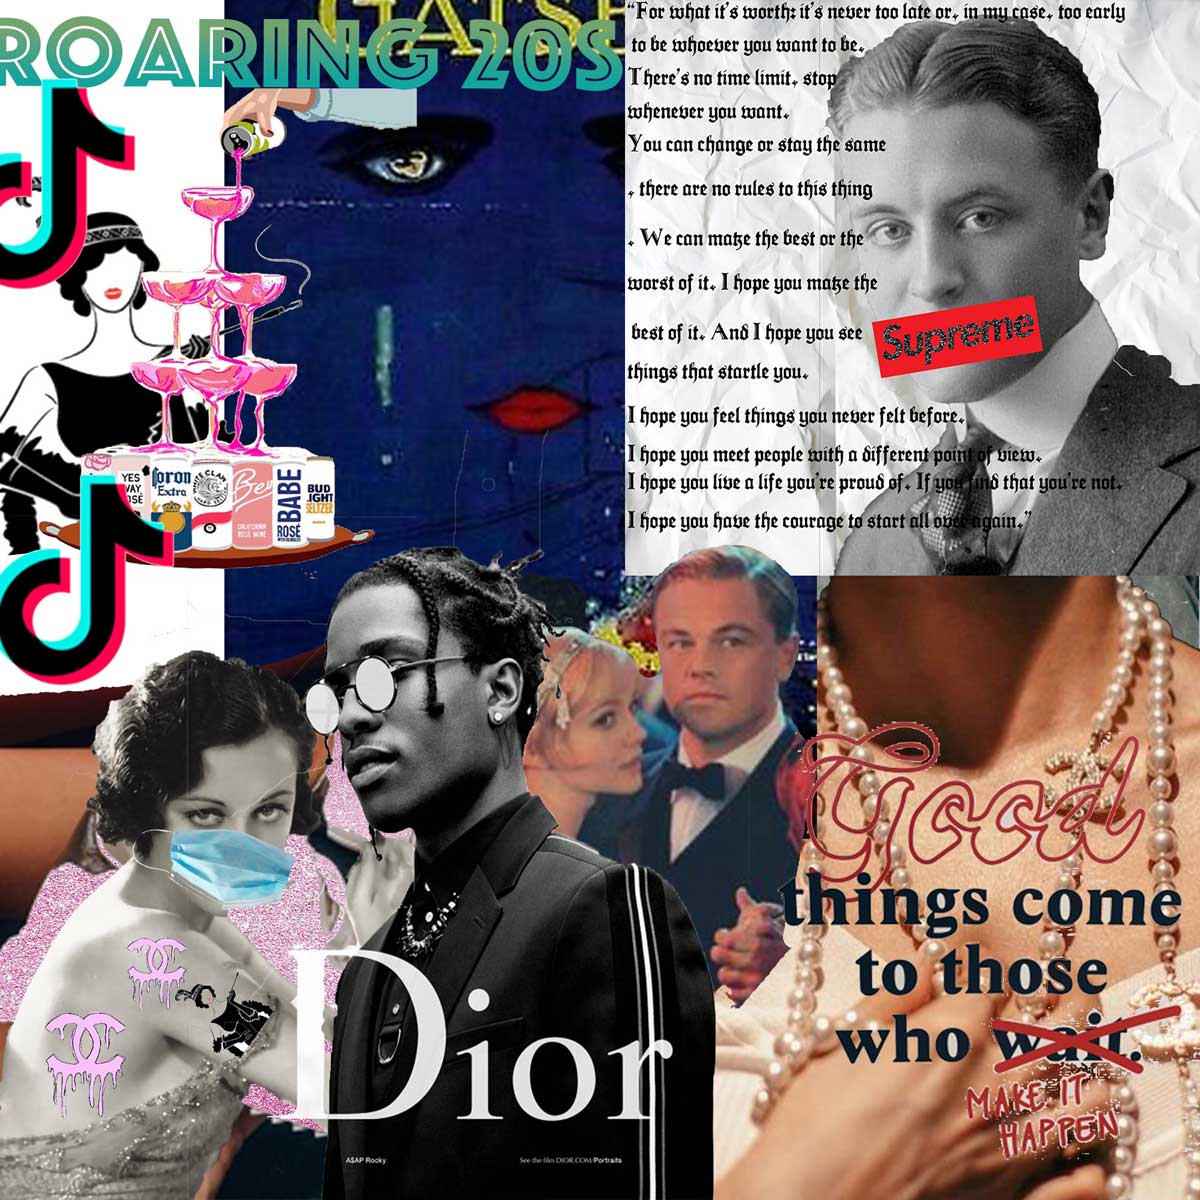 Roaring 20's collage